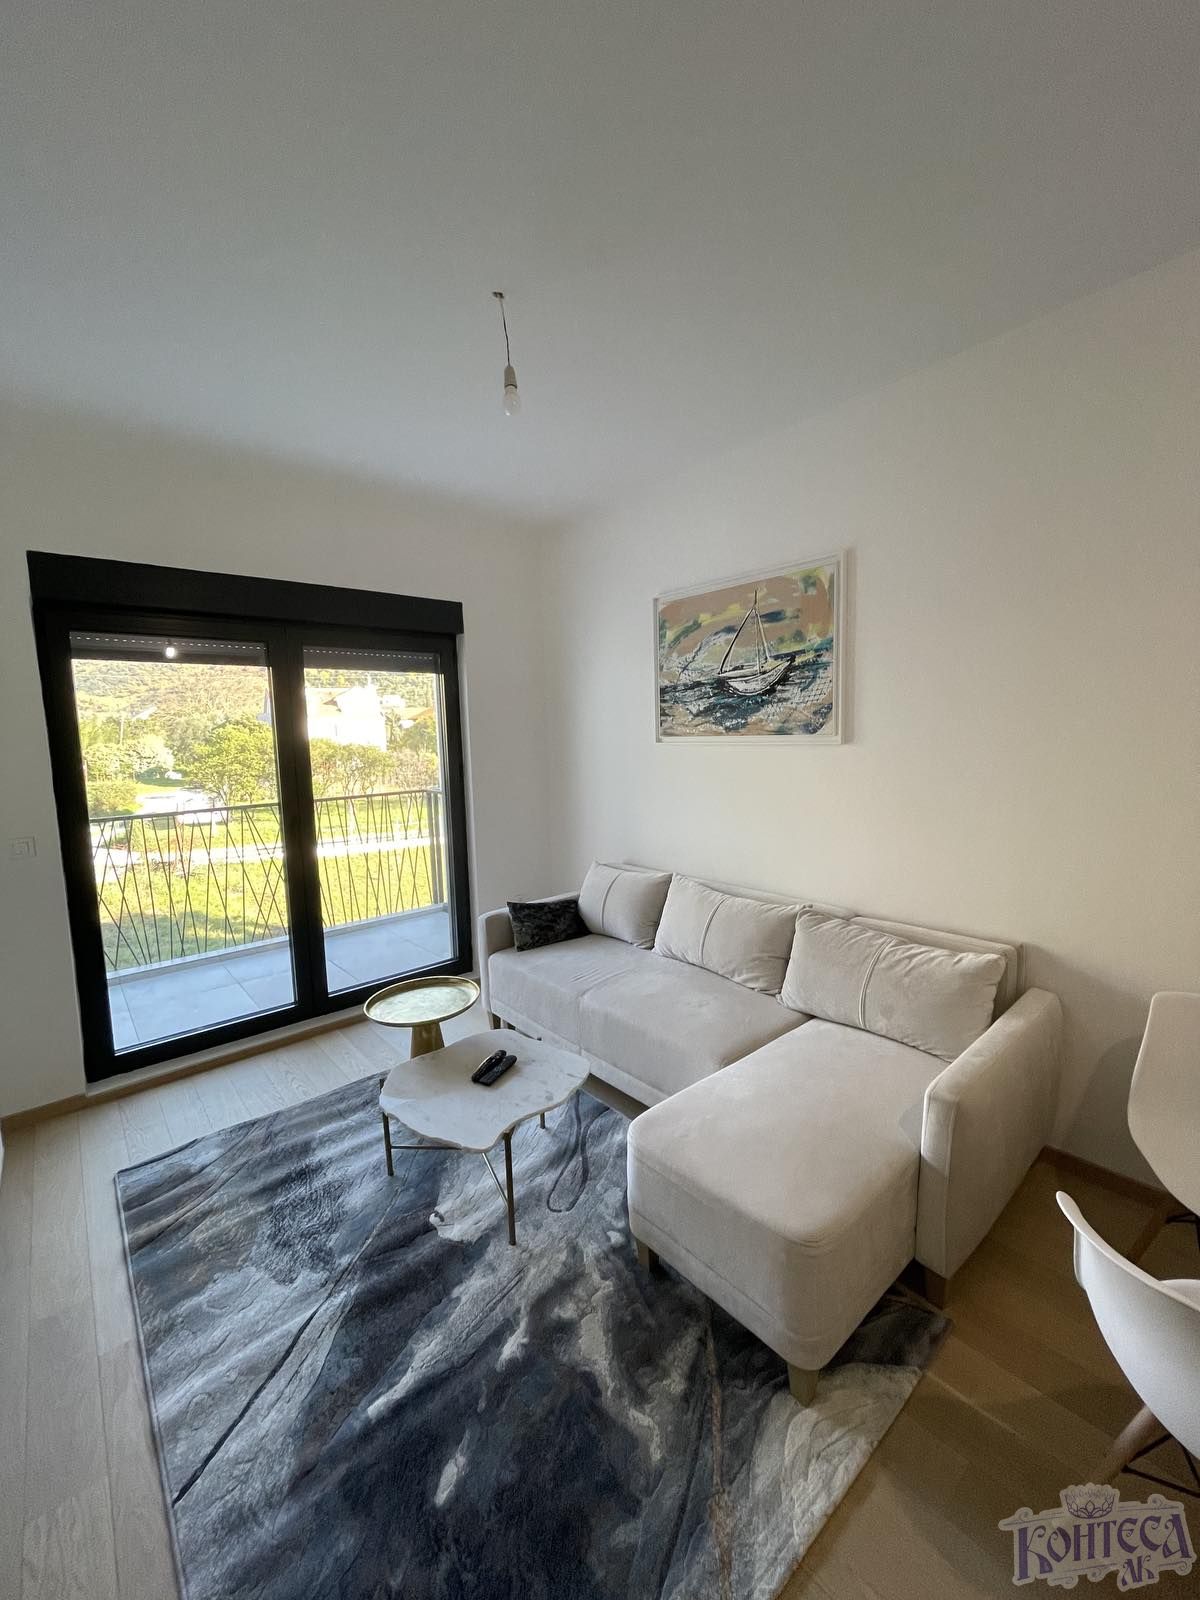 FOR RENT! One bedroom apartment in Seljanovo-Tivat